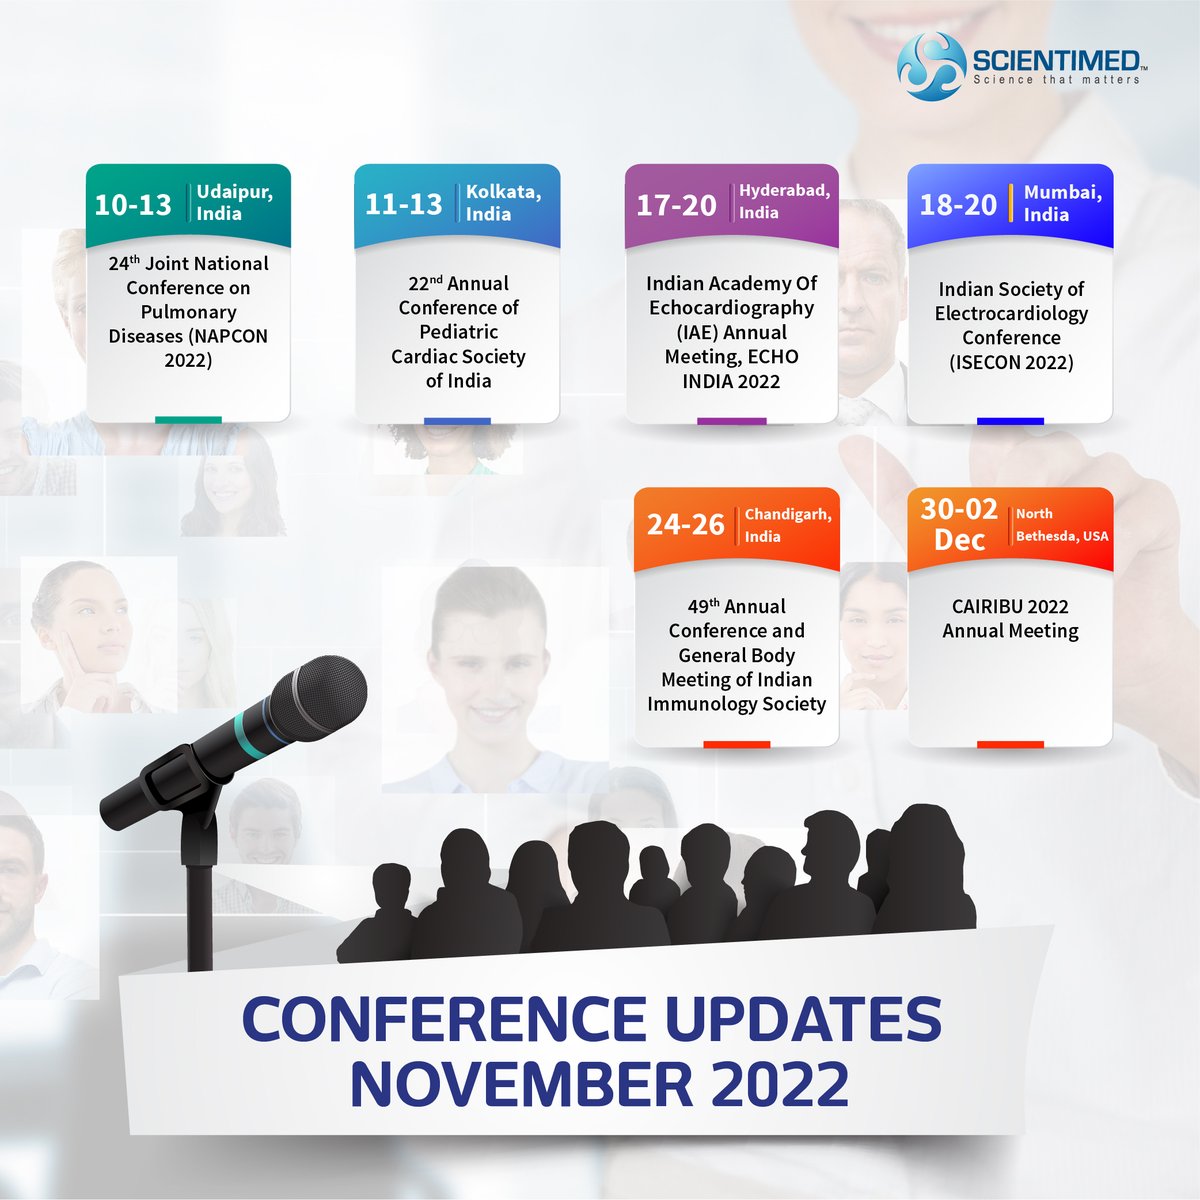 National and International conferences in November 2022.

#conferences #conferenceupdates #November2022 #Scientimed 

For more details on our services, please visit our website: scientimed.com